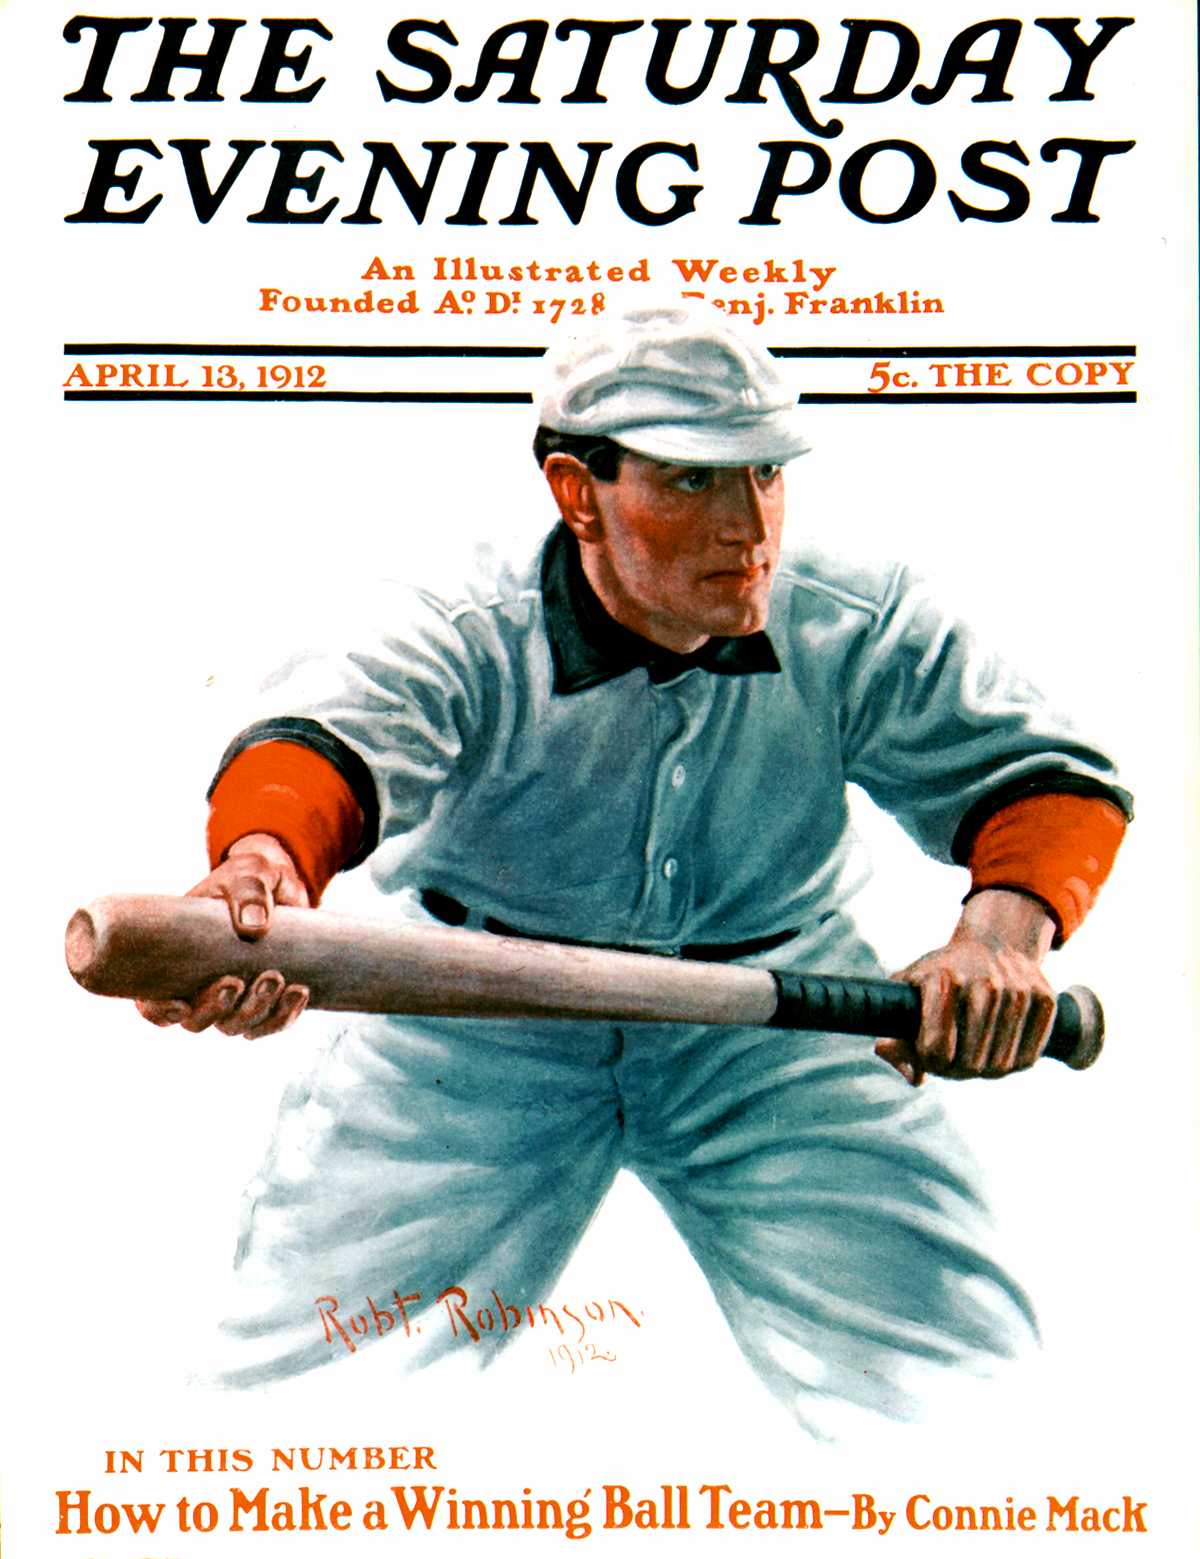 Cover of <em>The Saturday Evening Post<.em>, April 13, 1912 by Robert Robinson. The issue featured an article by then-manager of the Philadelphia Athletics baseball team, Connie Mack.